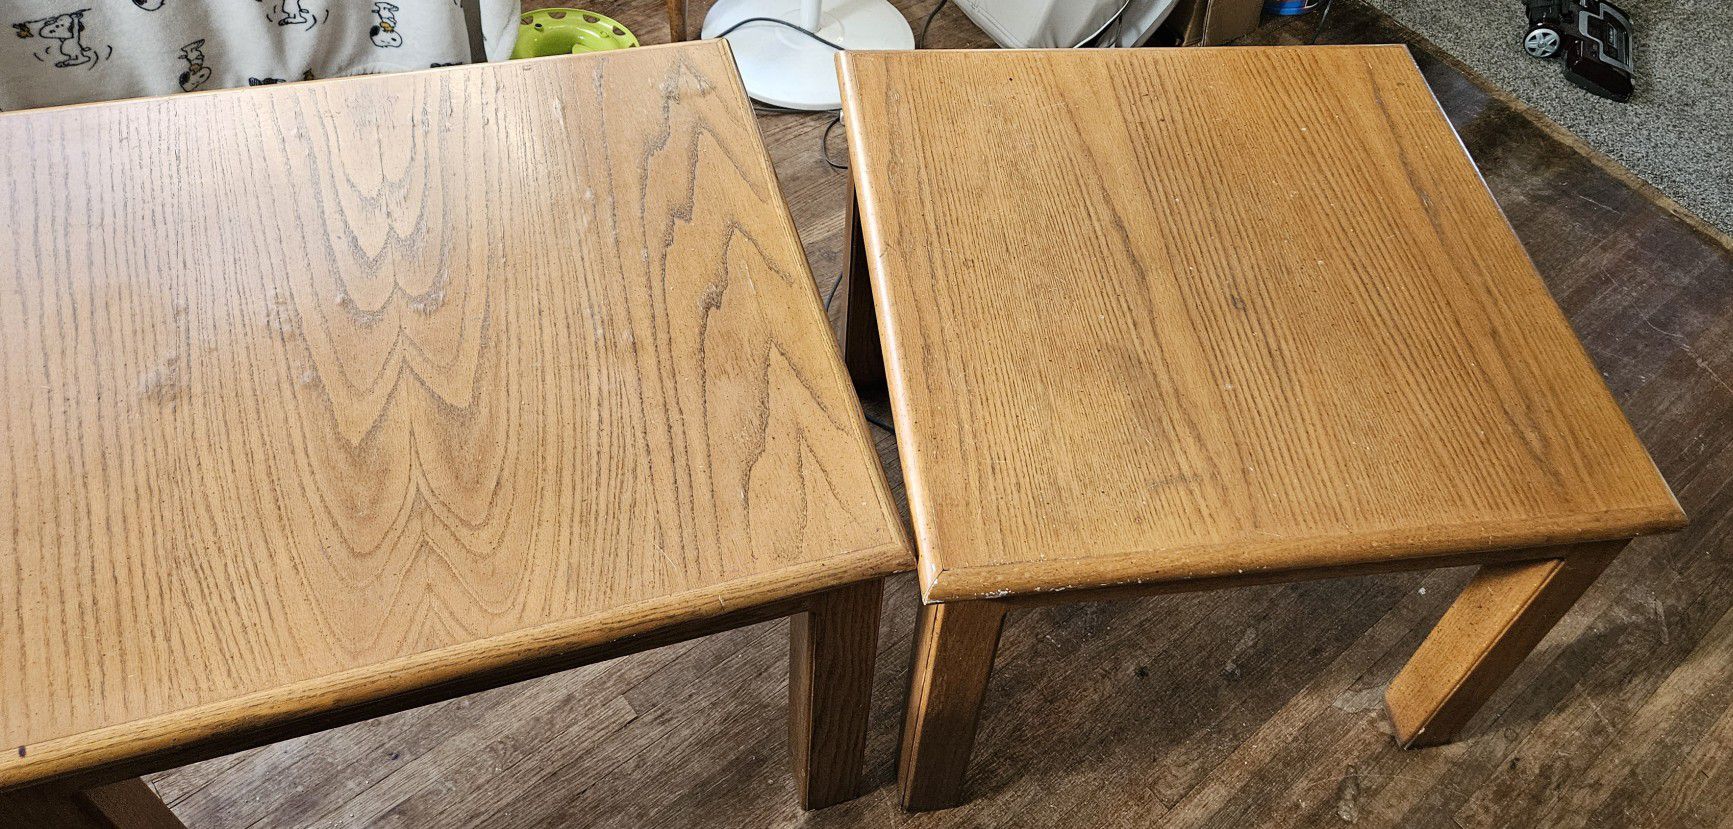 2 Solid Wood End Tables